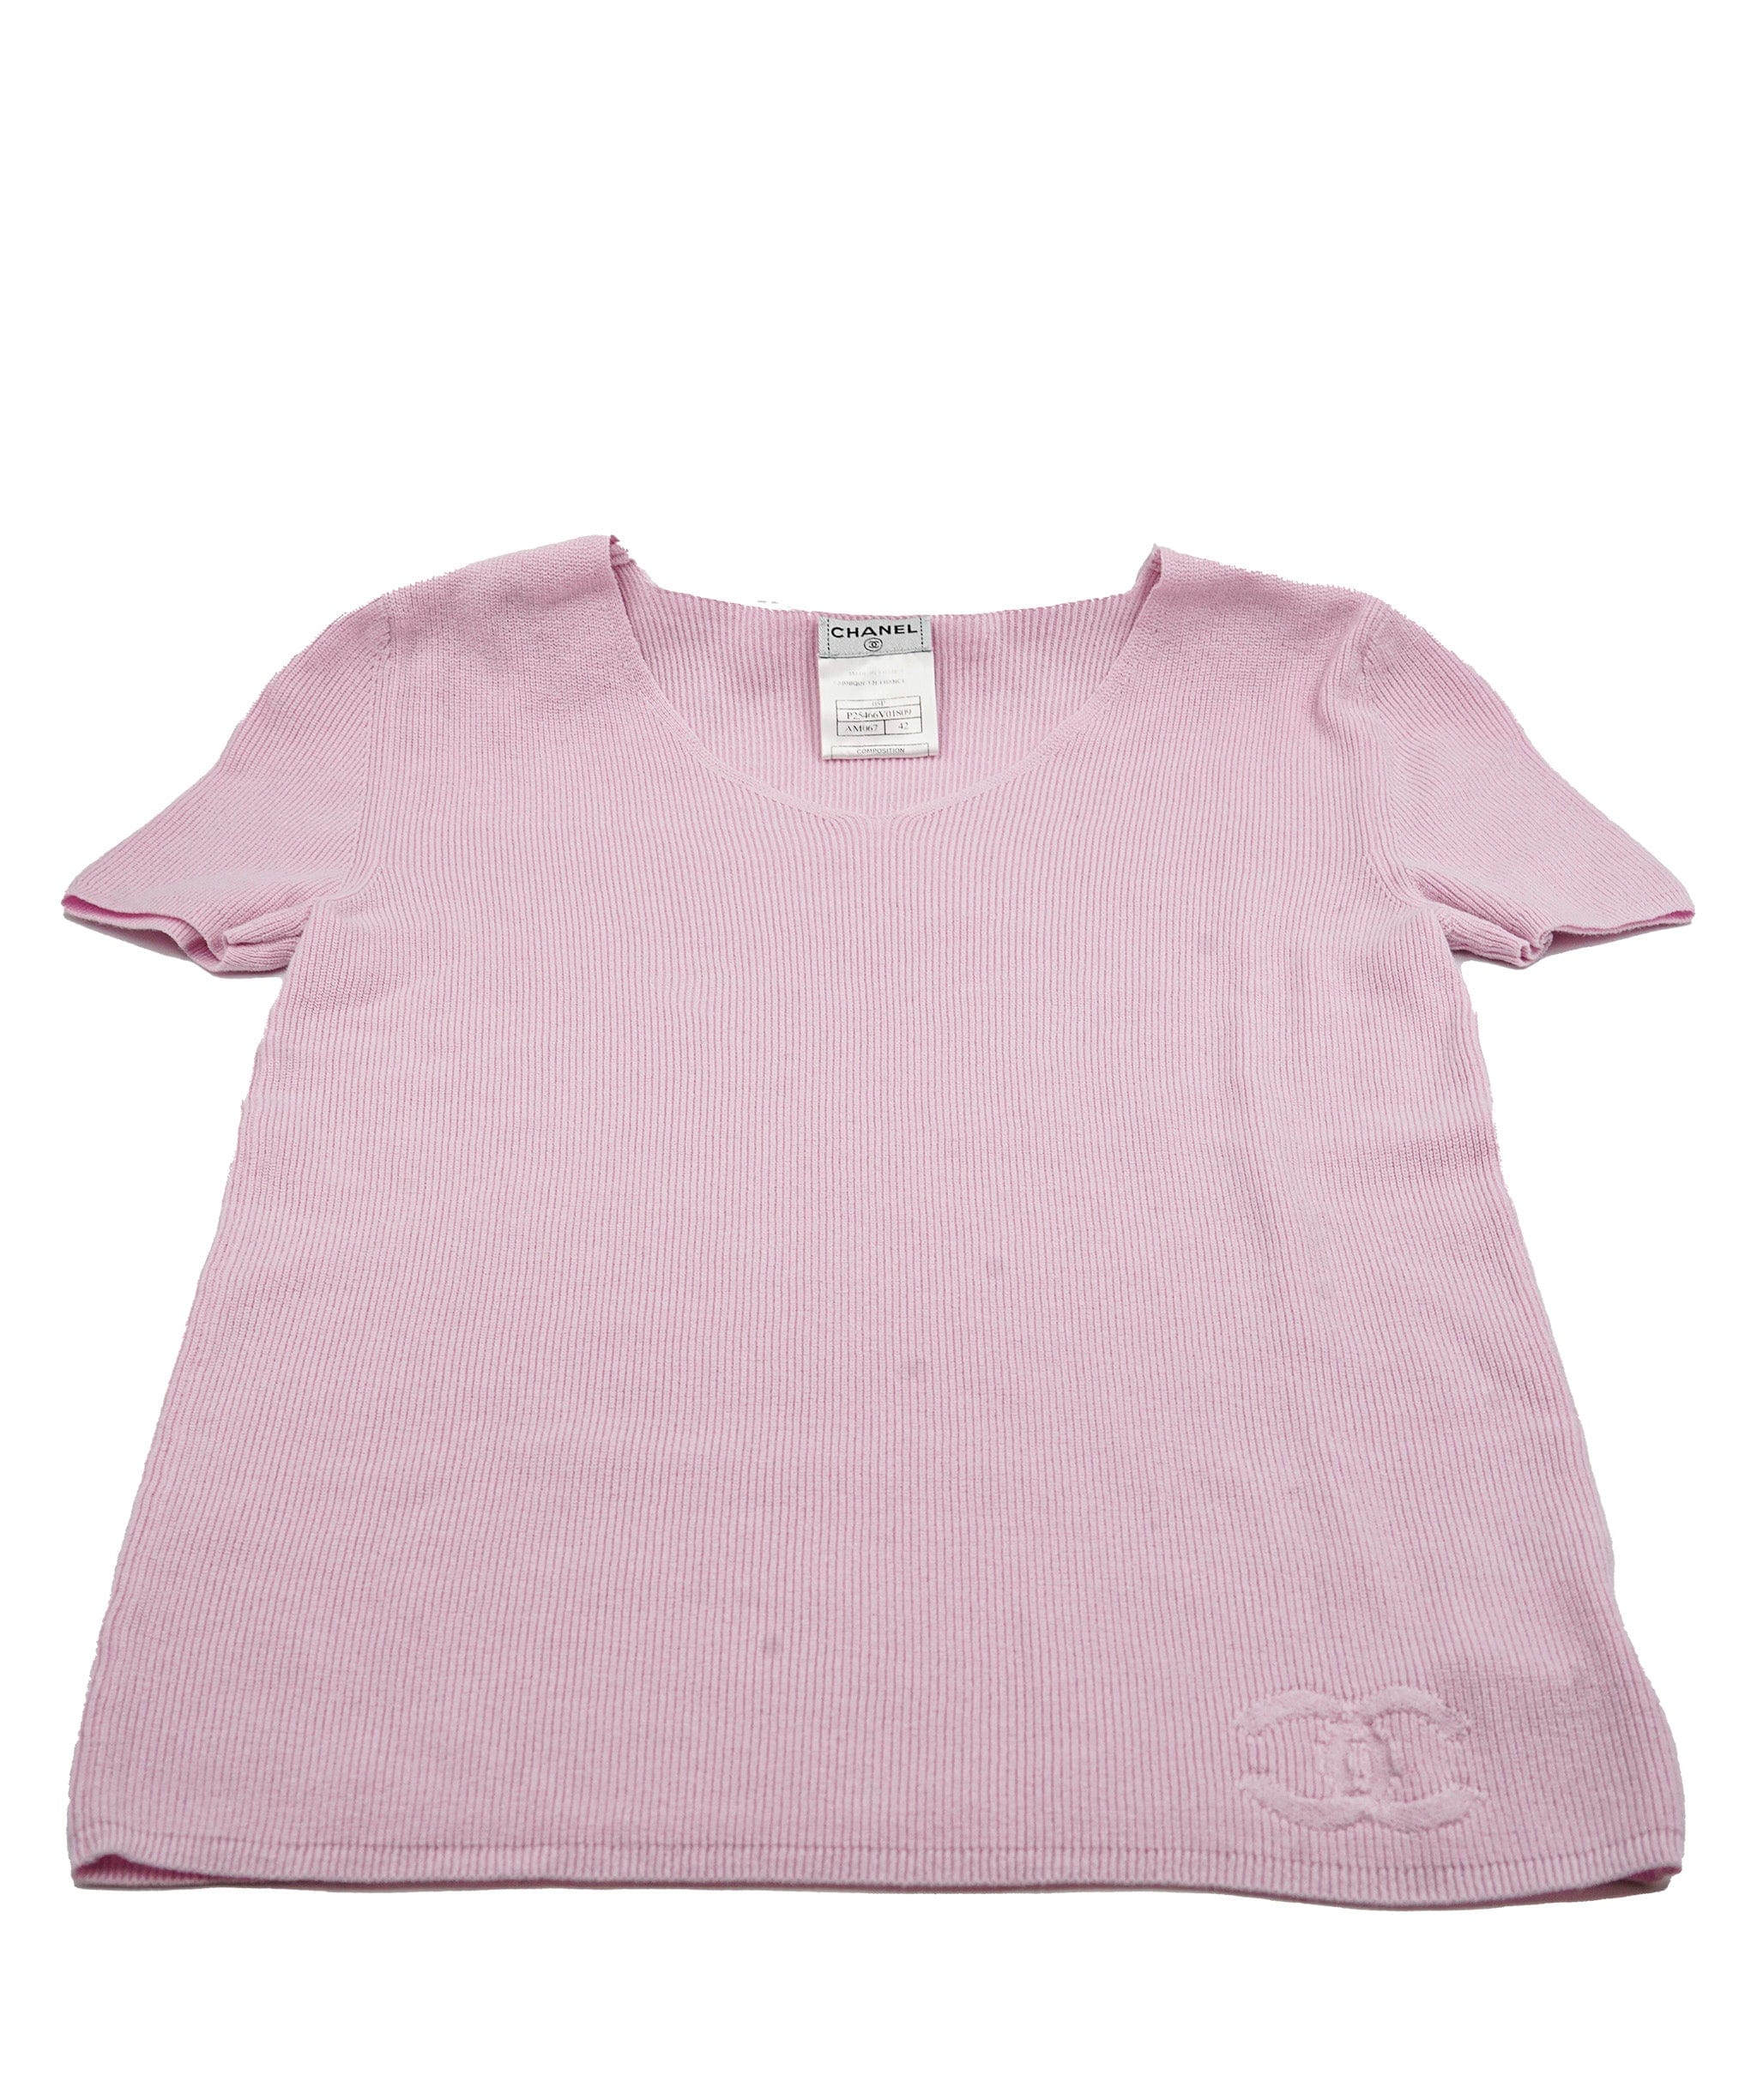 Chanel Chanel Knit Top Pink ASL5018